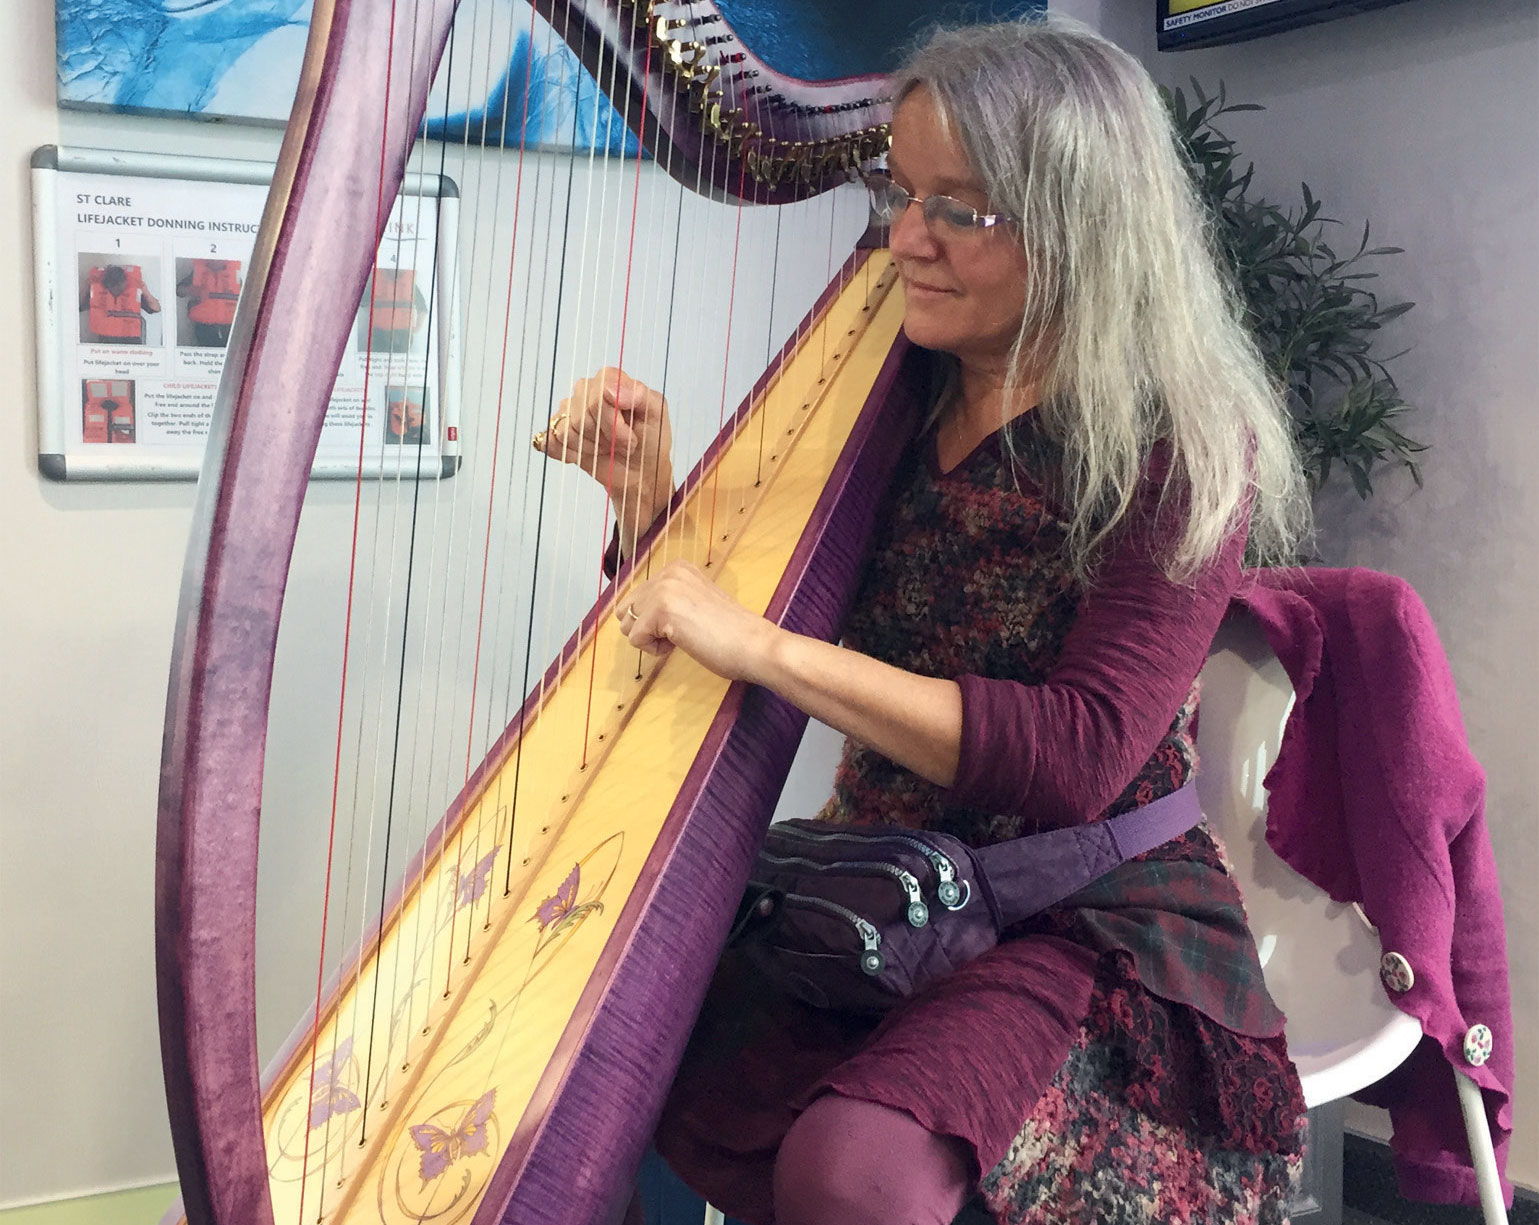 A woman wearing purple playing a harp indoors